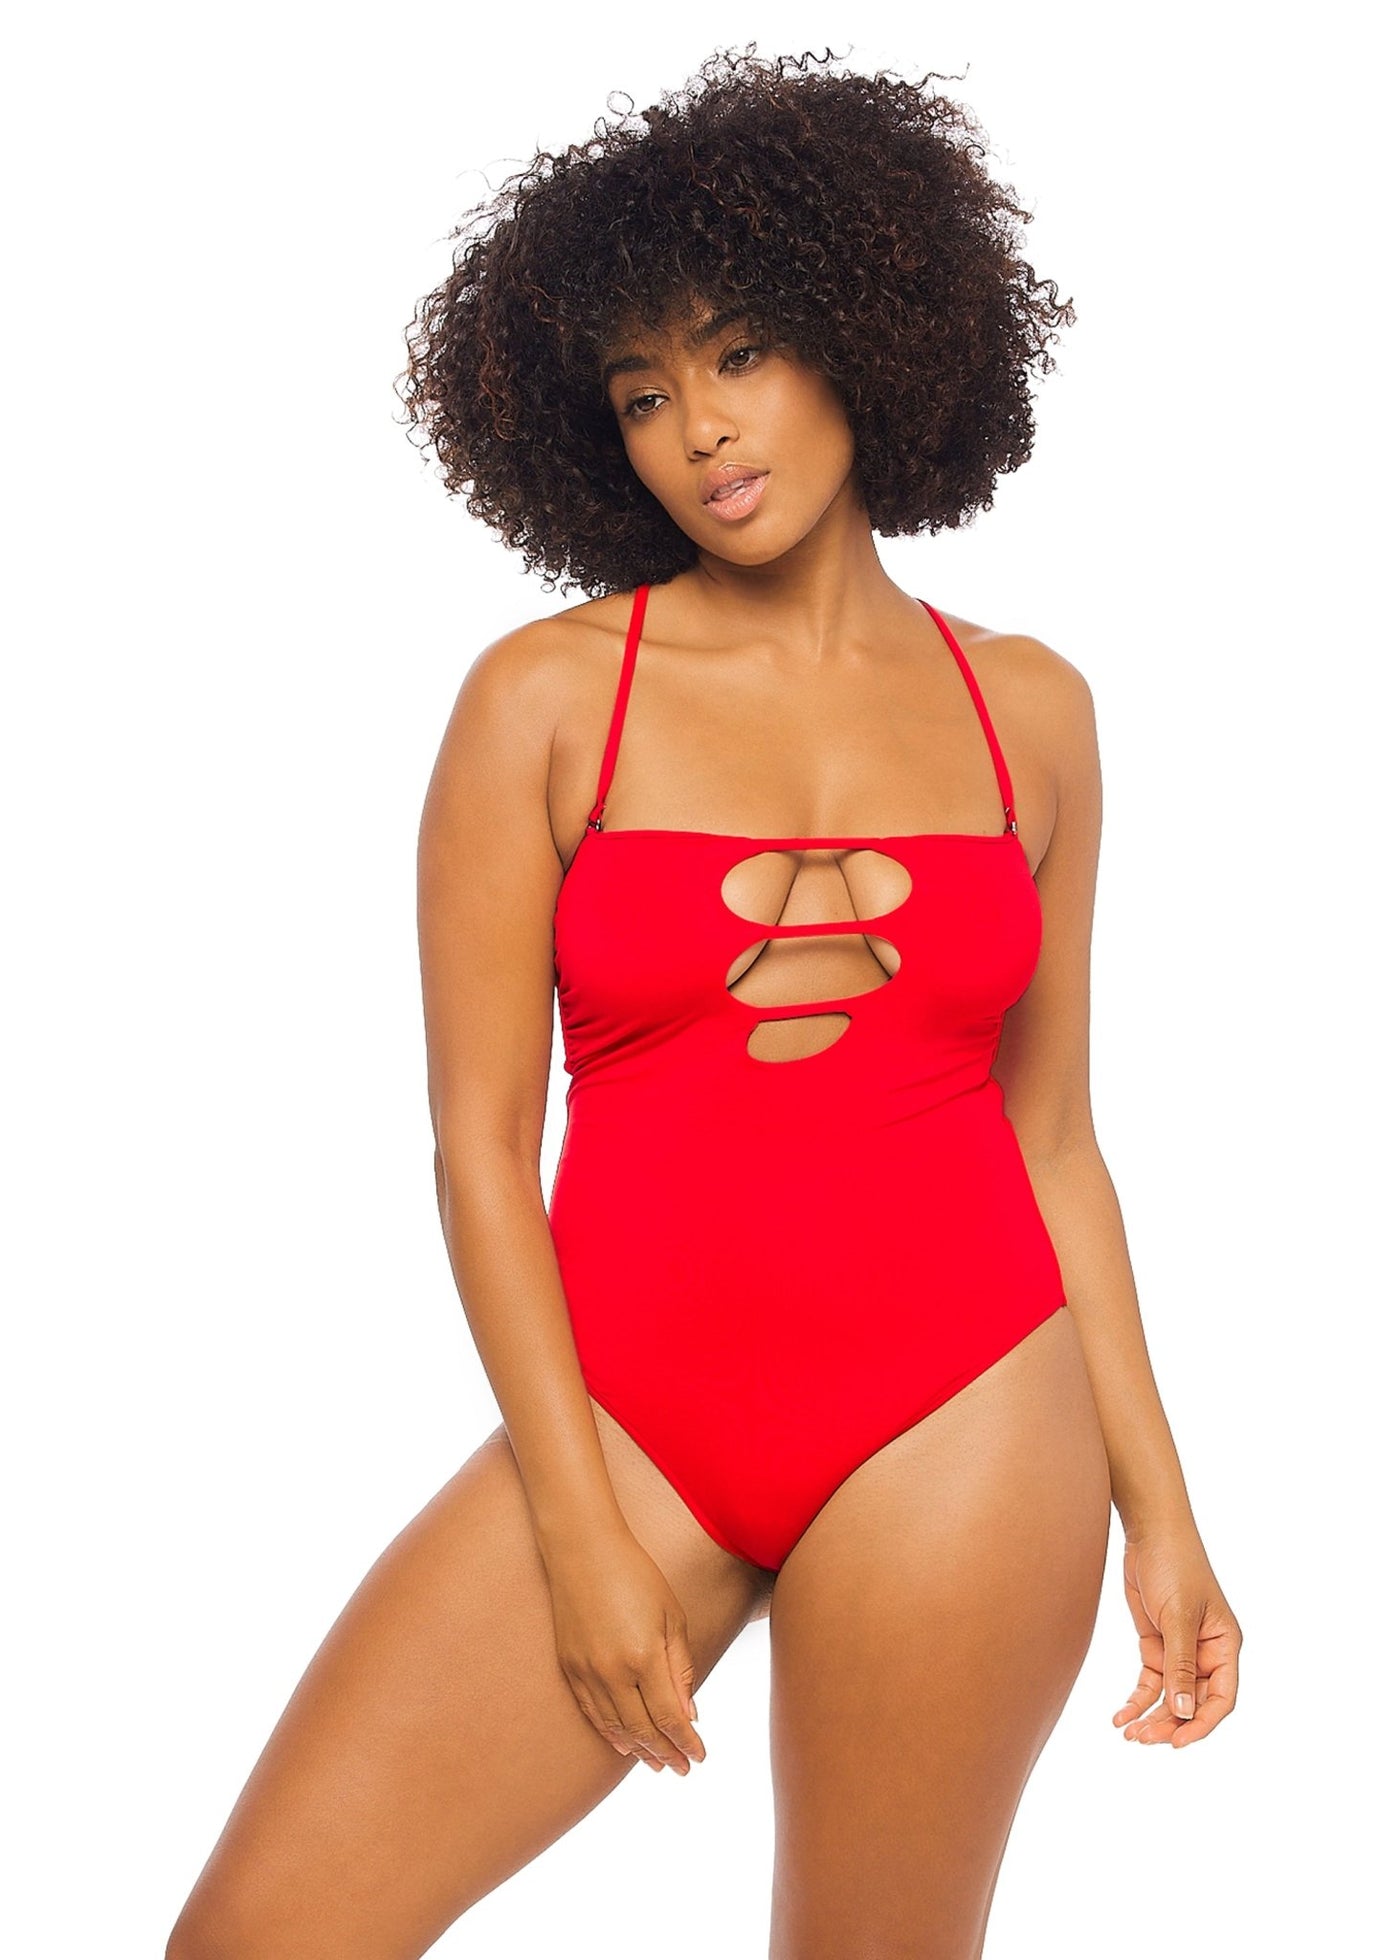 Cut-out One Piece Swimsuit